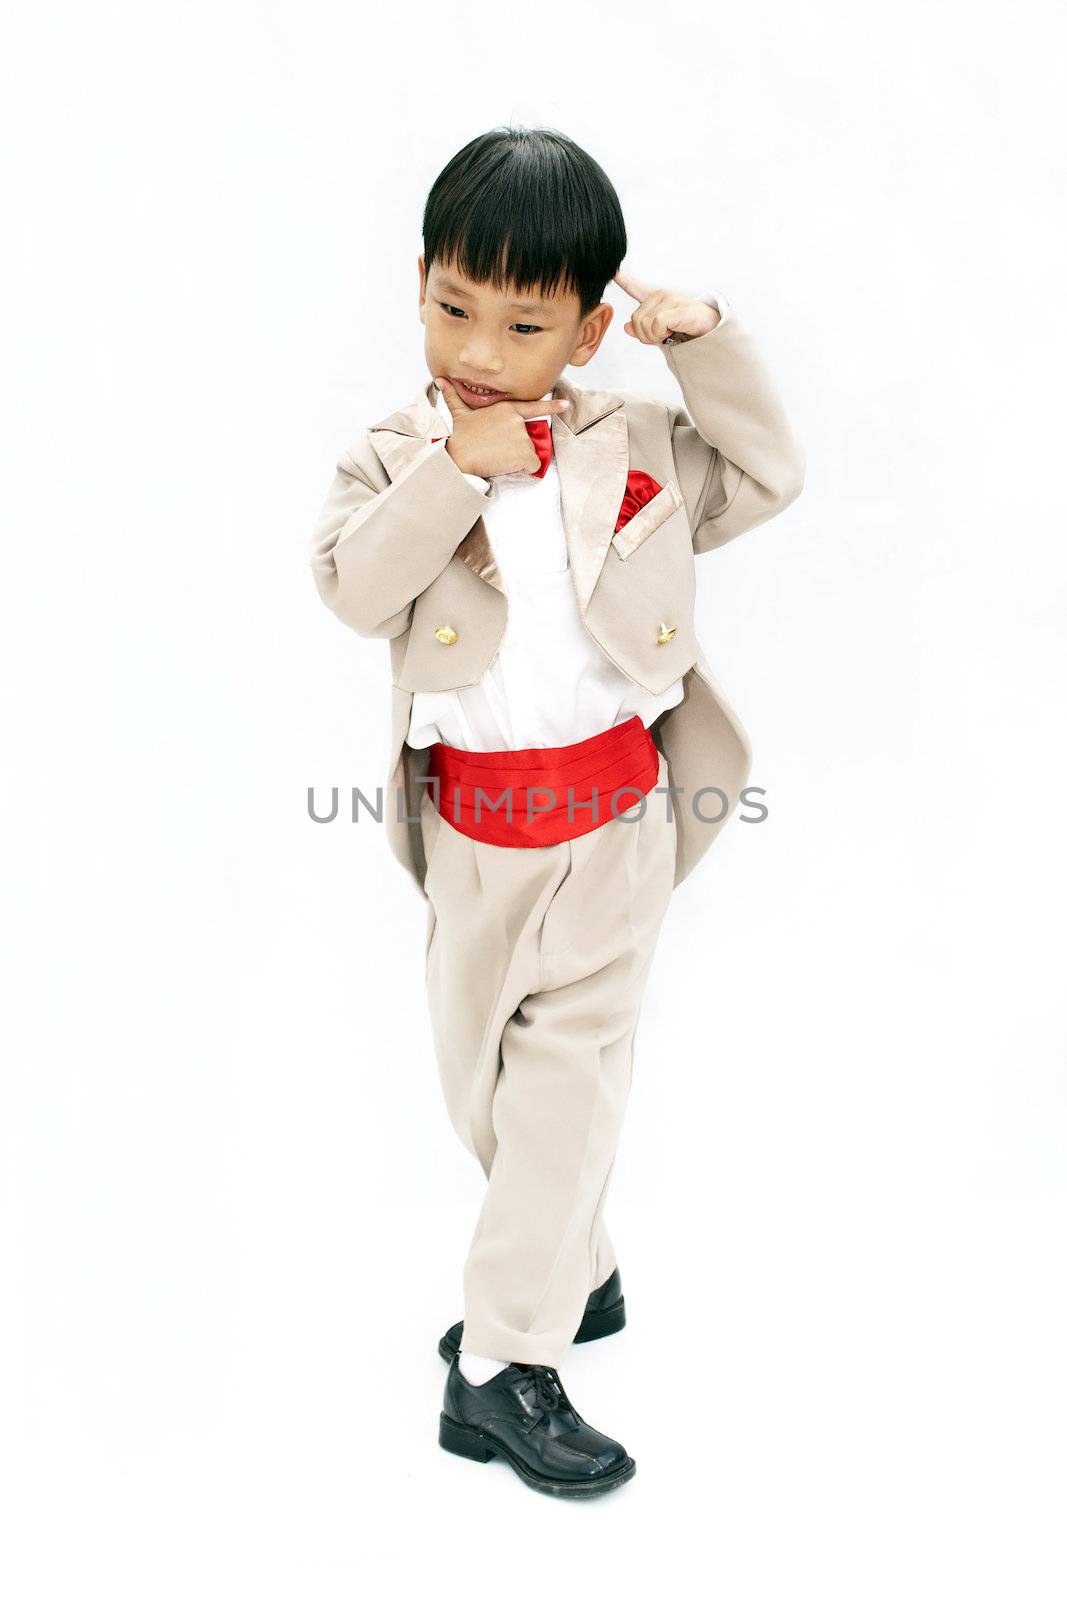 Little boy with brown tuxedo and red bow tie  by Yuri2012